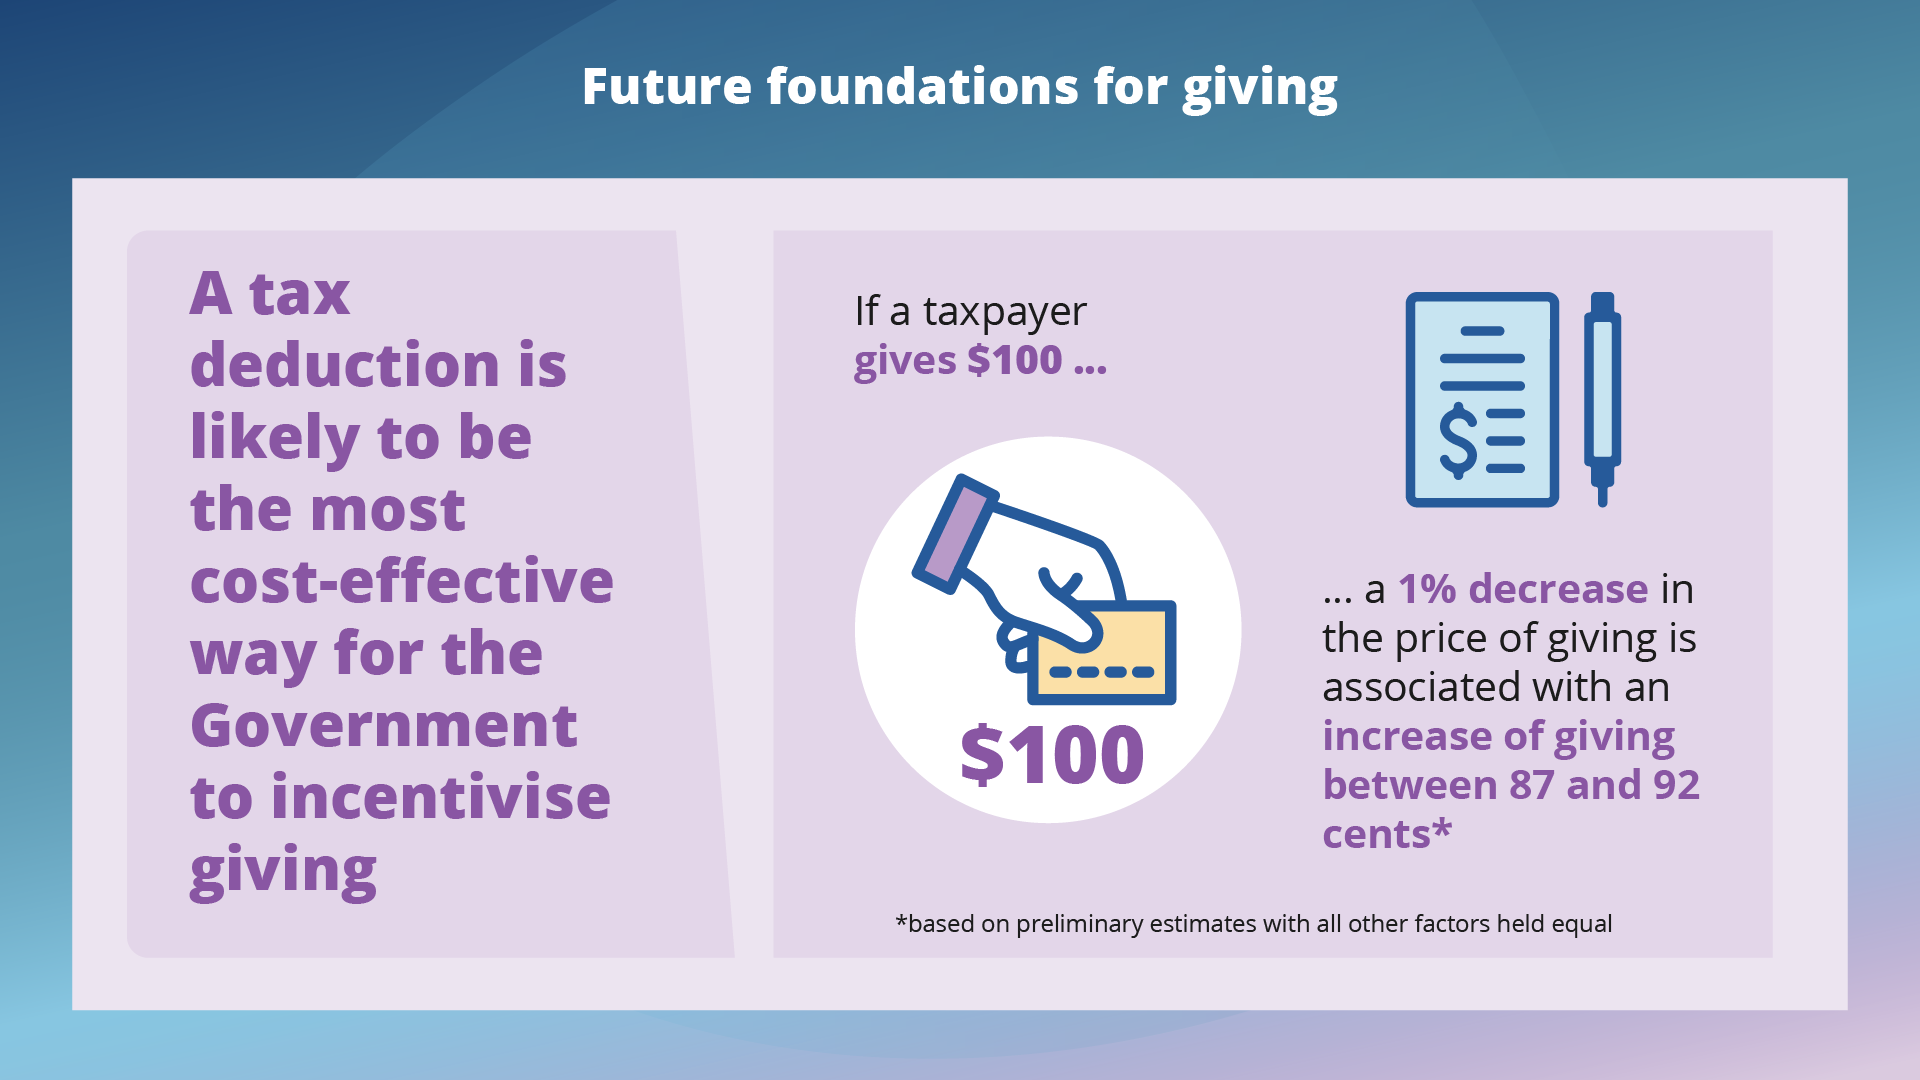 A tax deduction is likely to be the most cost-effective way for the Government to incentivise giving. If a taxpayer gives $100, a 1% decrease in the price of giving is associated with an increase of giving between 87 and 92 cents - based on preliminary estimates with all other factors held equal.